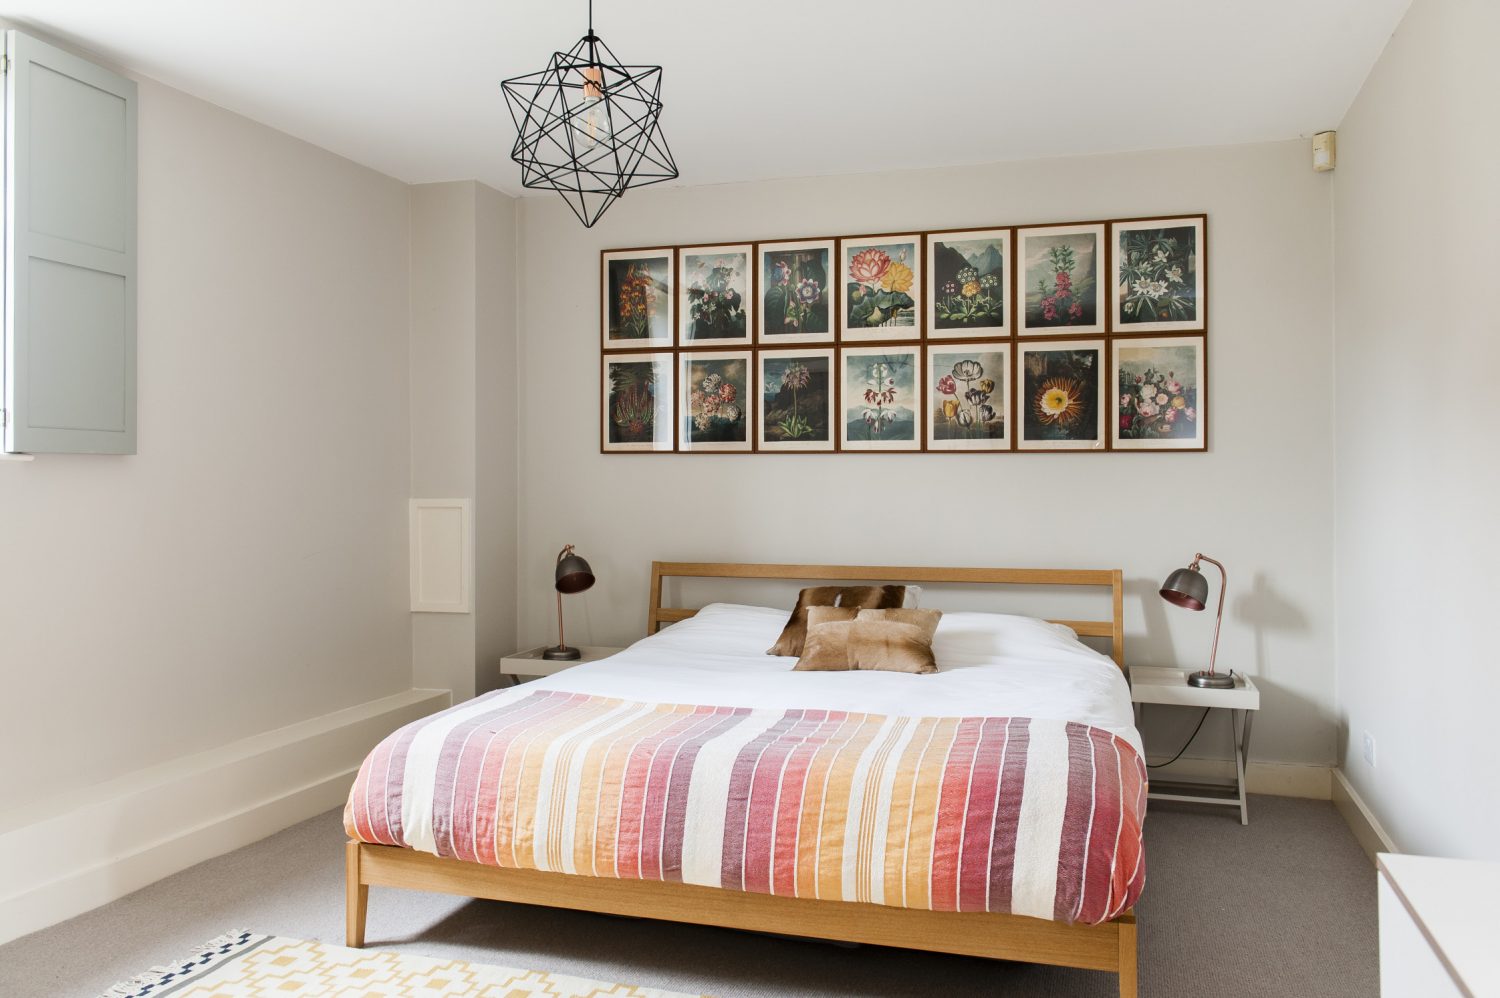 Another door from the dining area leads through to a generously sized bedroom, painted in Farrow & Ball Skimming Stone. A striking arrangement of framed flower prints hang over the headboard, taken from a book called the The Temple of Flora by a botanist Robert John Thornton